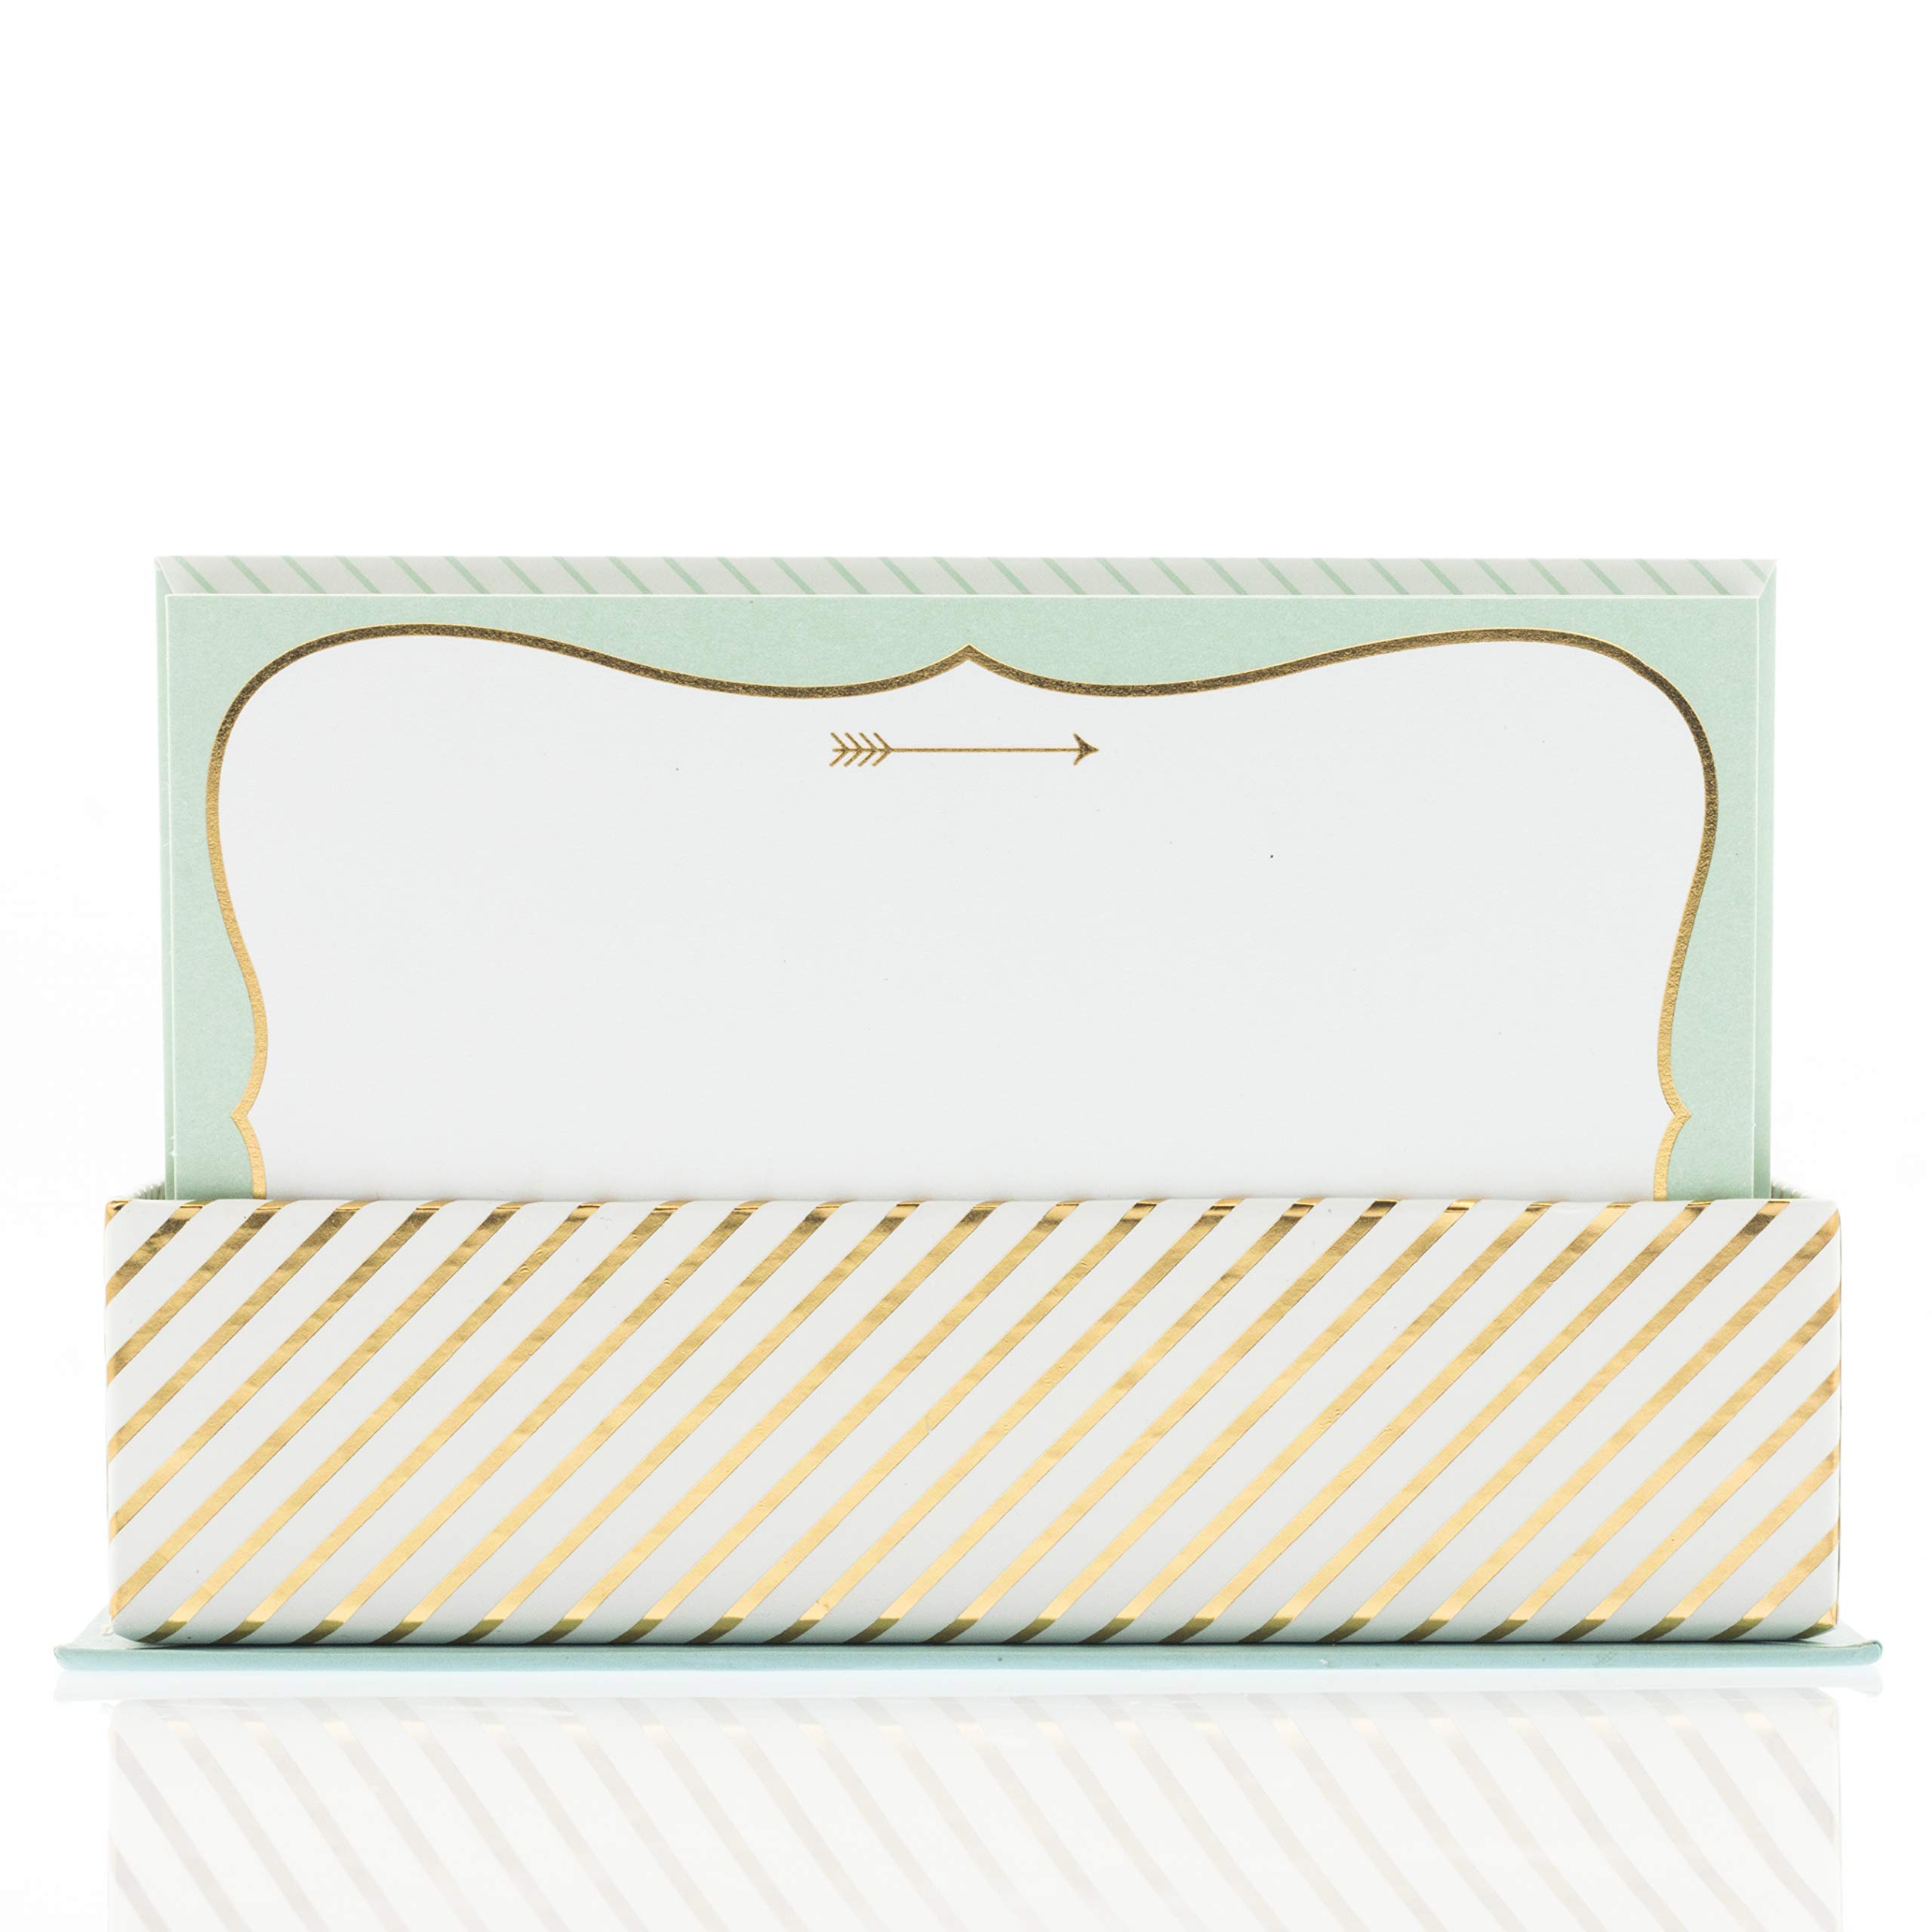 Graphique Mint and Gold Flat Notes – Note Card Stationery with Stylish, Soft Teal Border and Printed Gold Arrow, 50 Note Cards and Matching Envelopes for Thank You Notes, Invitations, Gifts and More, 5.625